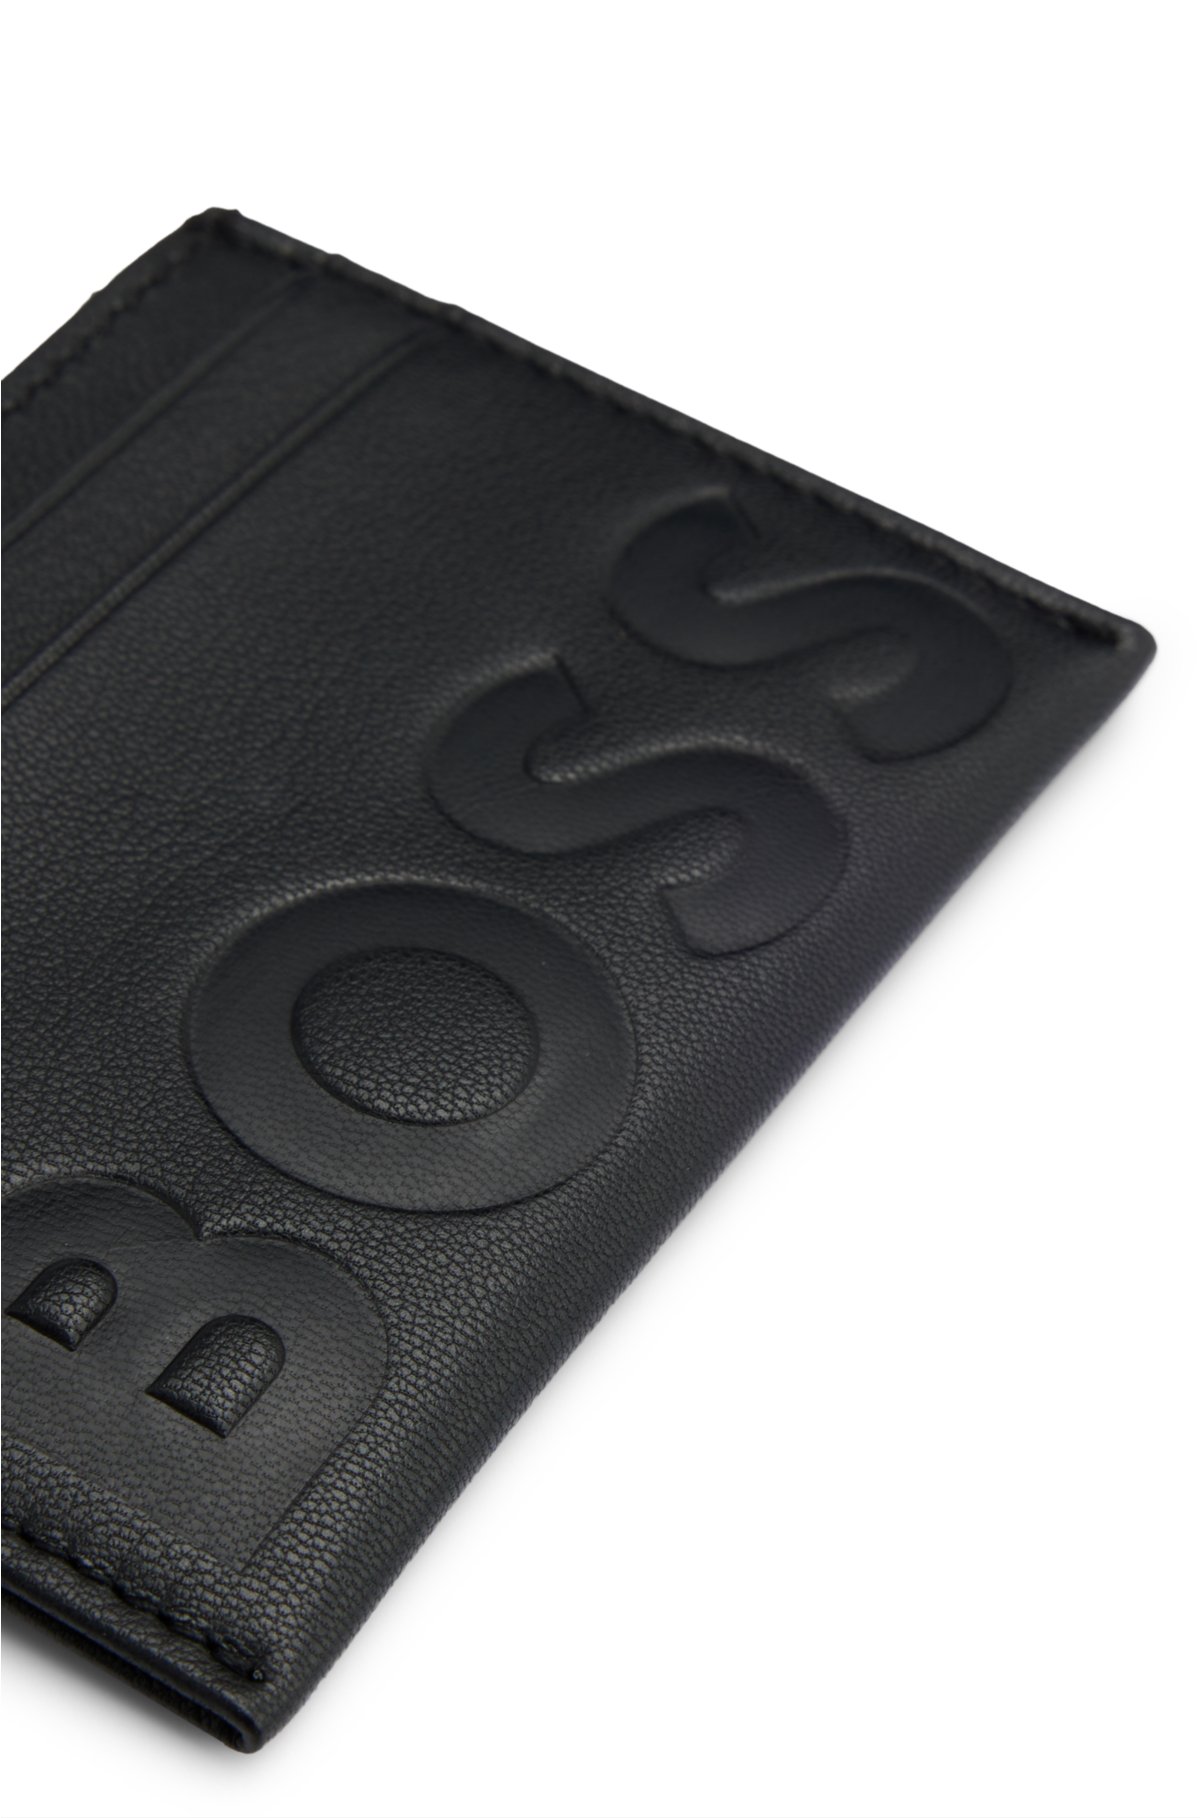 BOSS - Grained-leather card holder with embossed logo